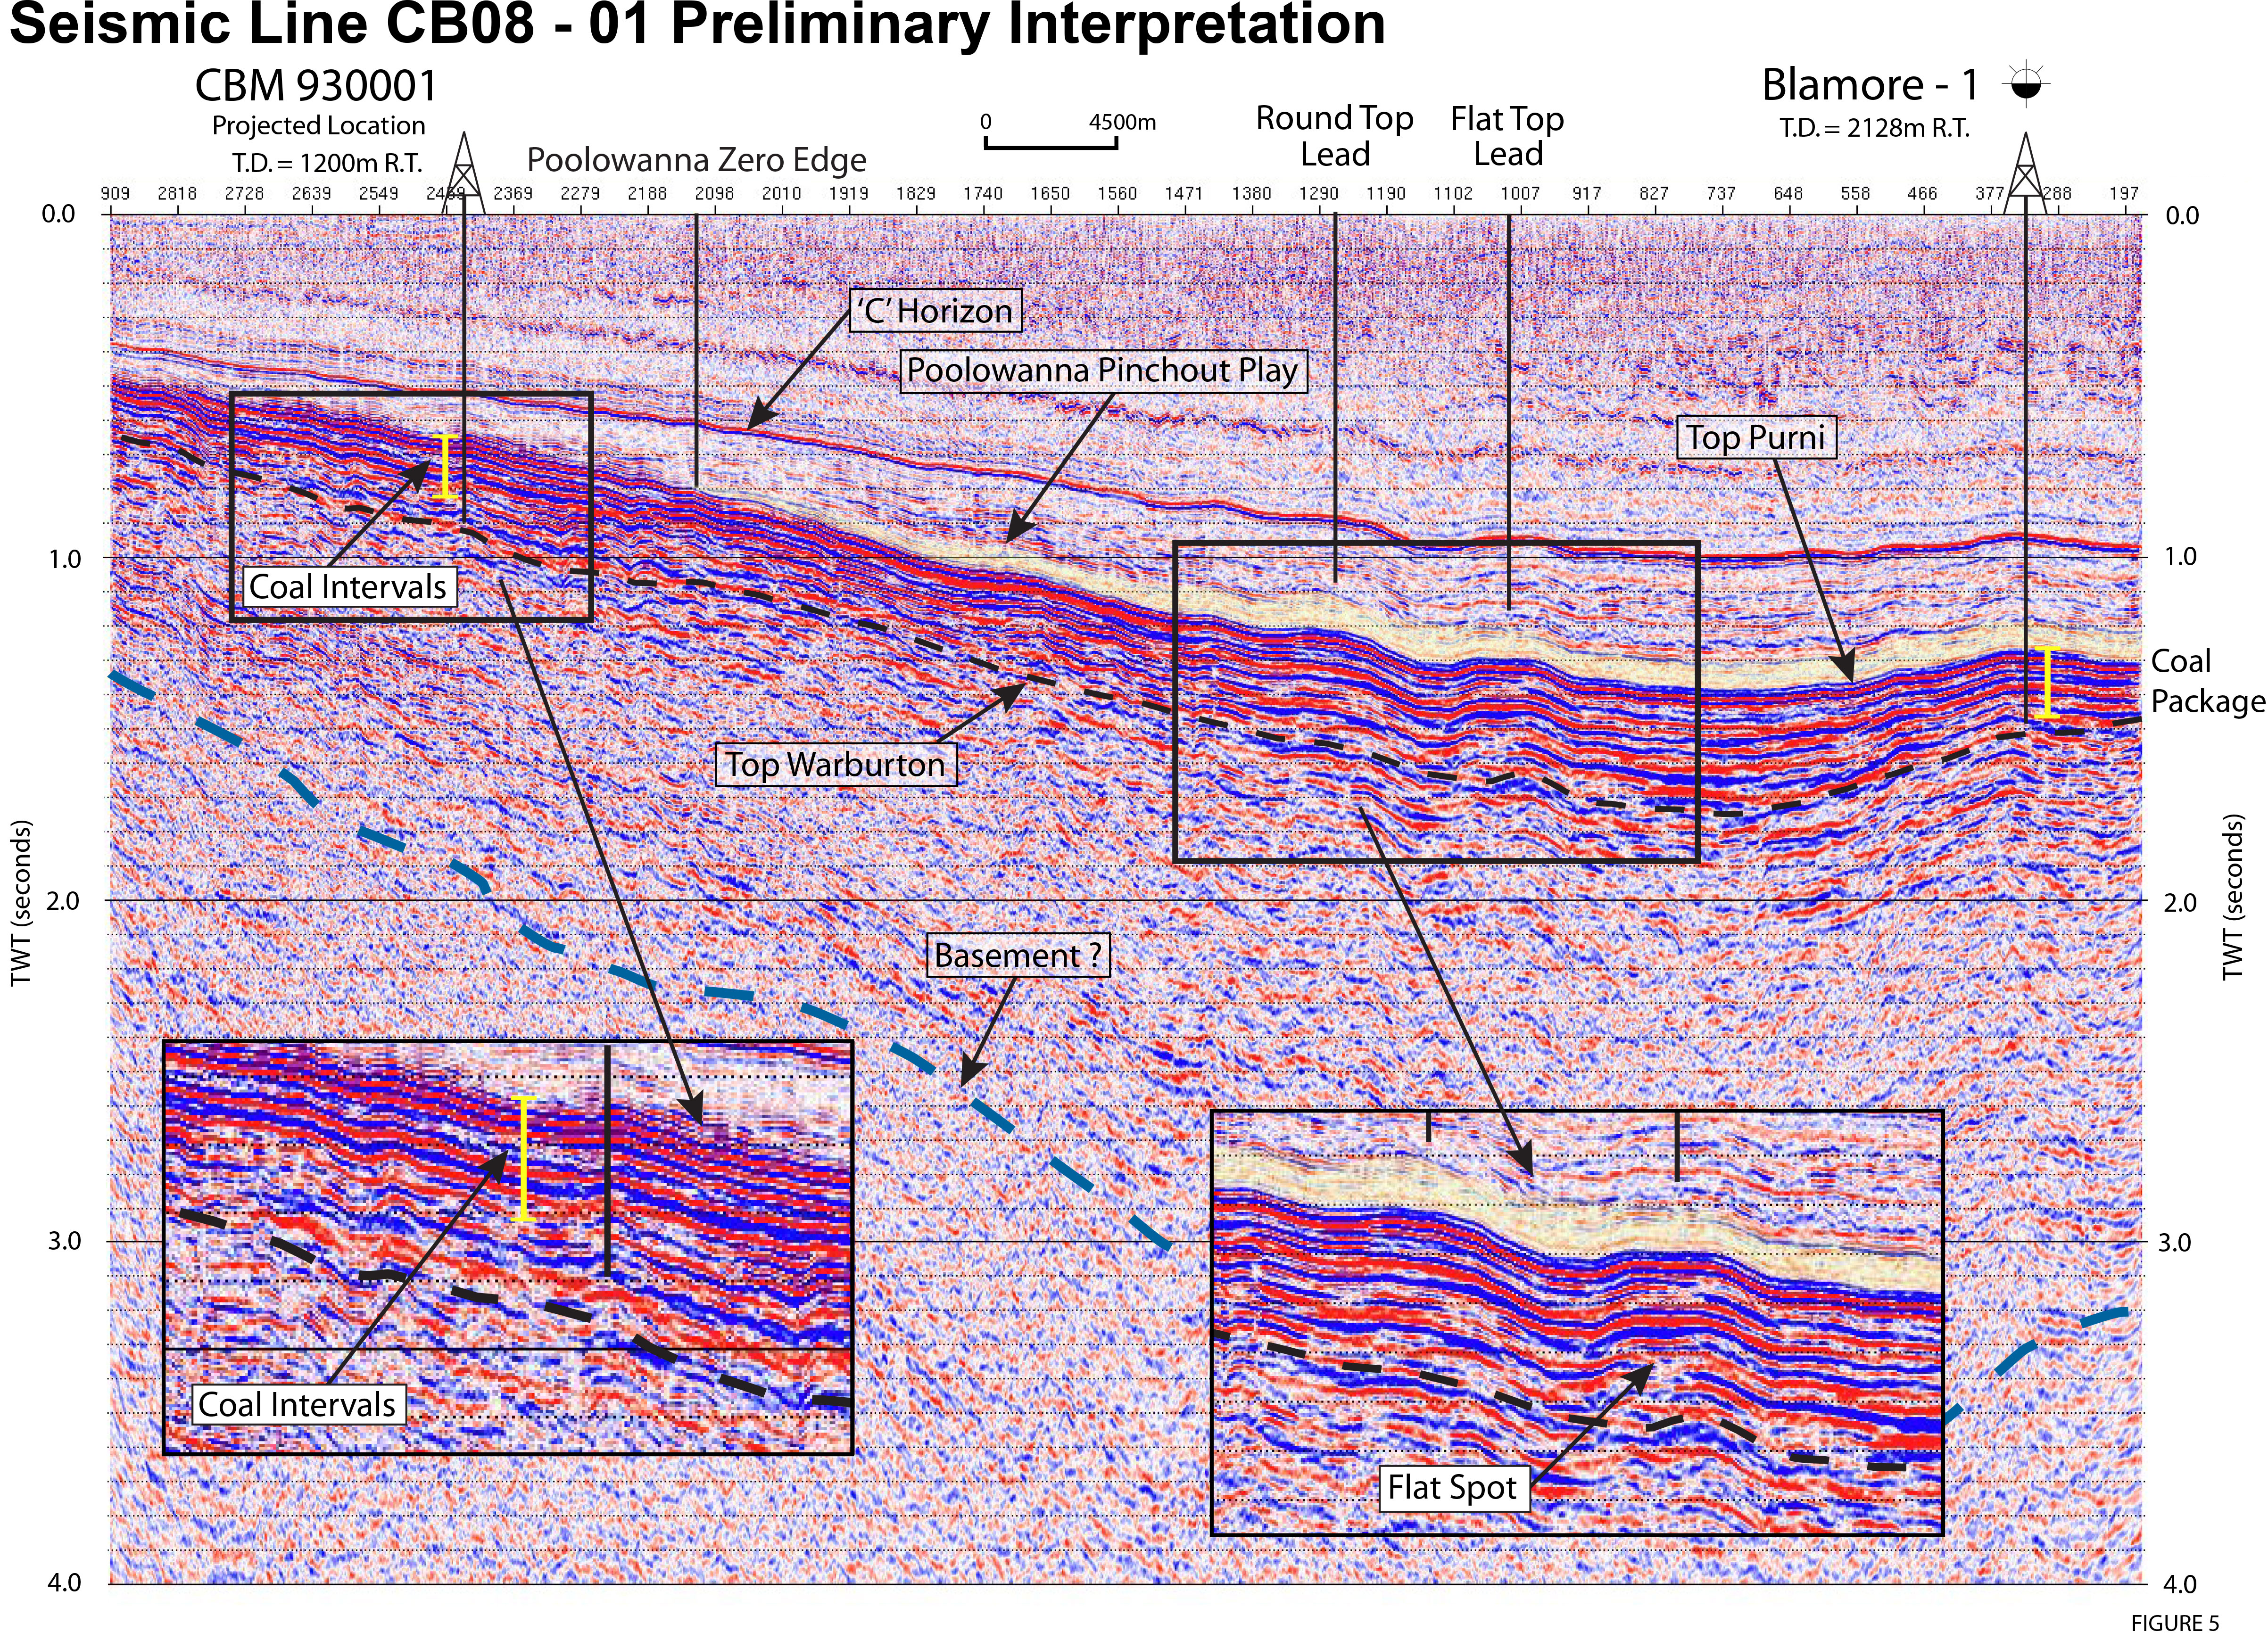 Figure 5 from the CBM 93-01 Well Completion Report